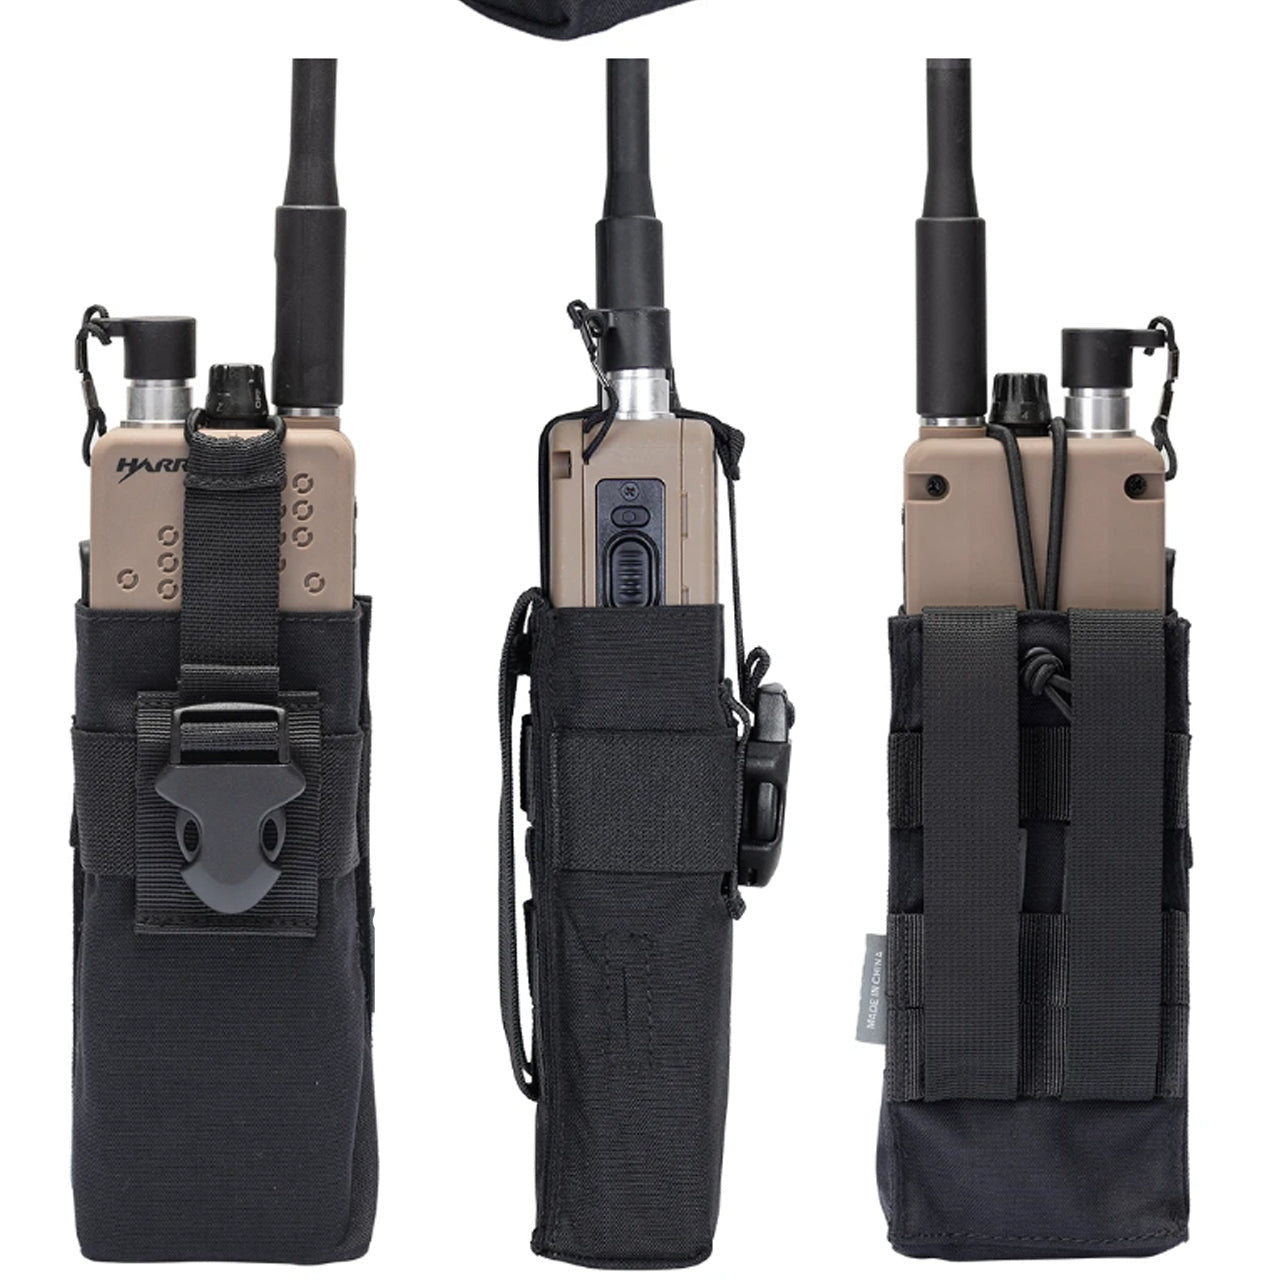 This pouch has been tailor-made to house your in-service Harris 152/148 radio, enabling you to access its screen and control panel with ease and speed. No longer will you need to take out the radio to change settings www.defenceqstore.com.au black views around pouch